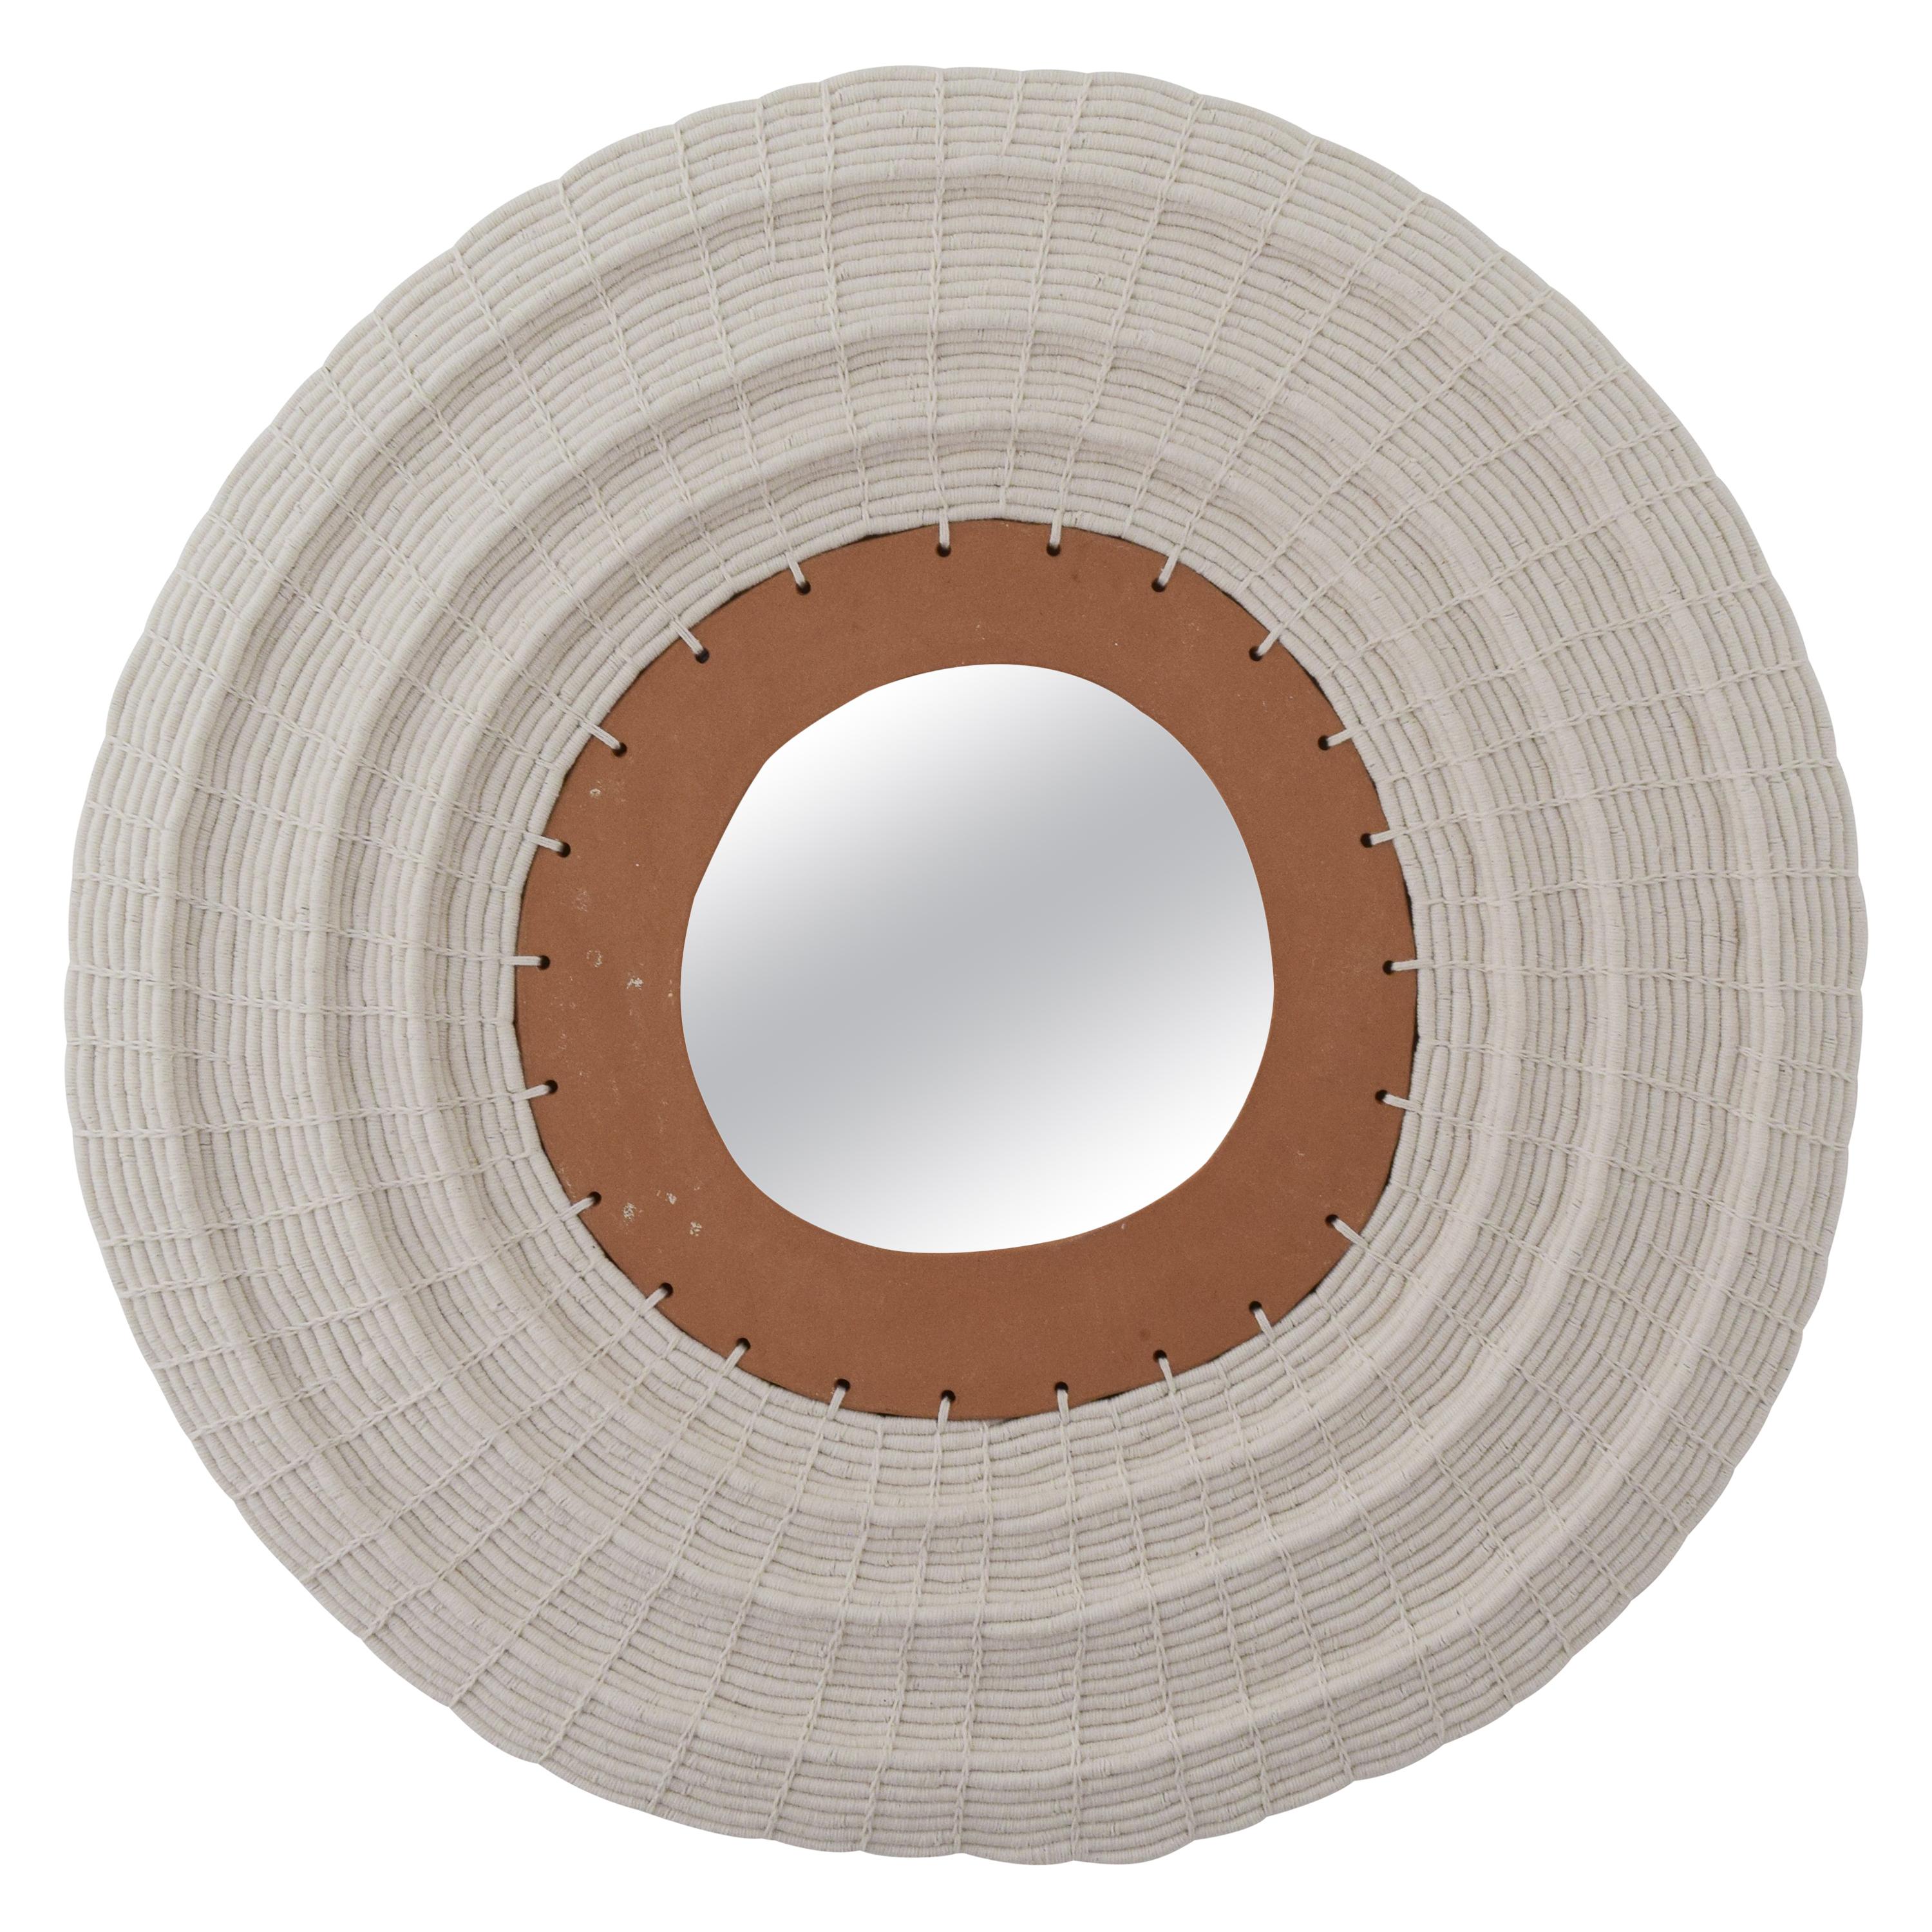 28" Round Woven Cotton and Ceramic Mirror in White and Natural Terracotta